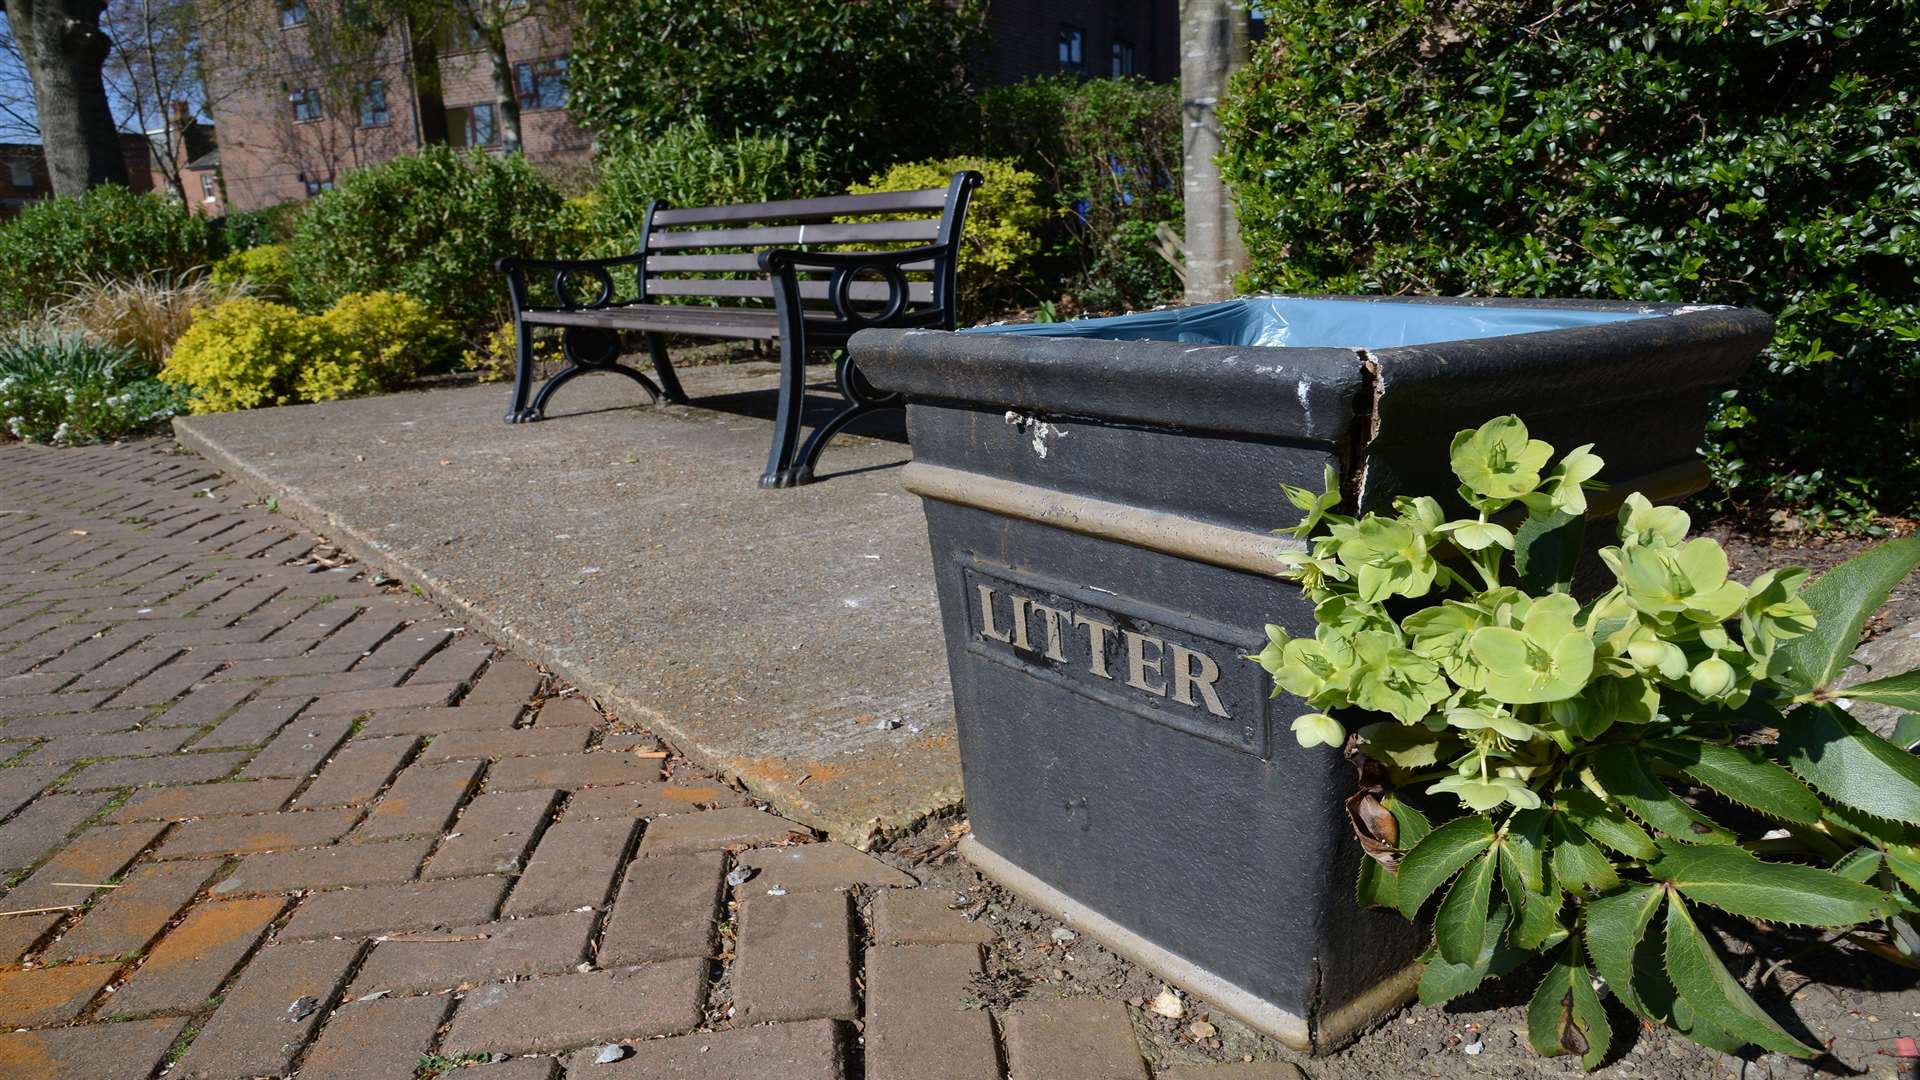 Litter bins are provided throughout the town